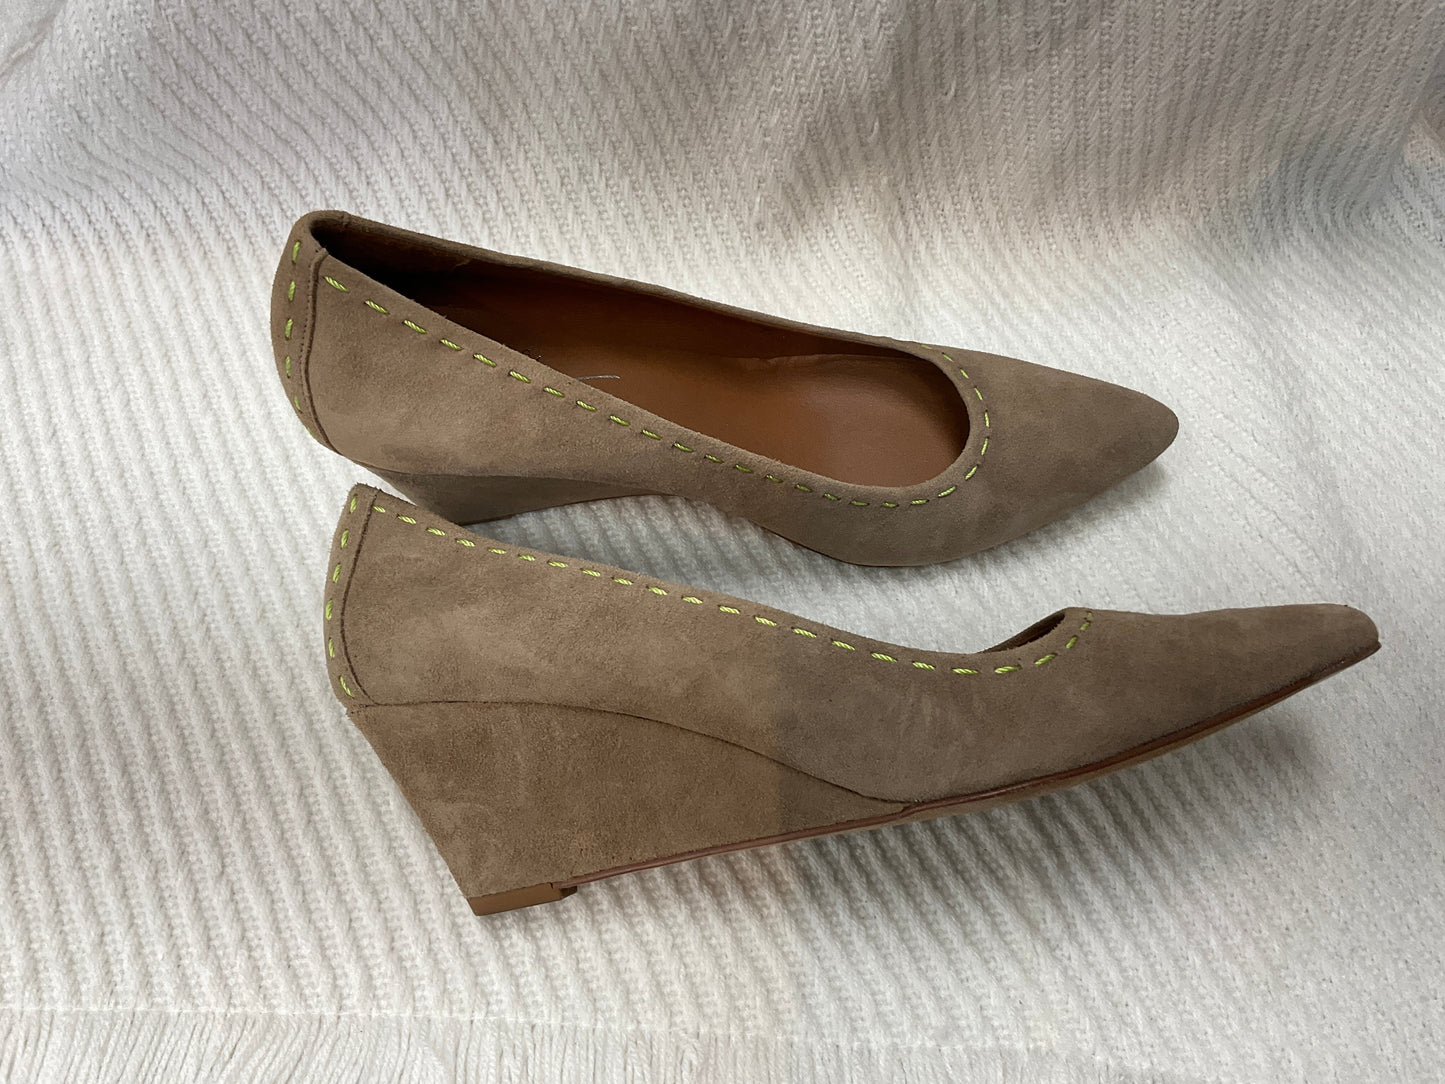 Shoes Heels Wedge By Donald Pliner  Size: 8.5